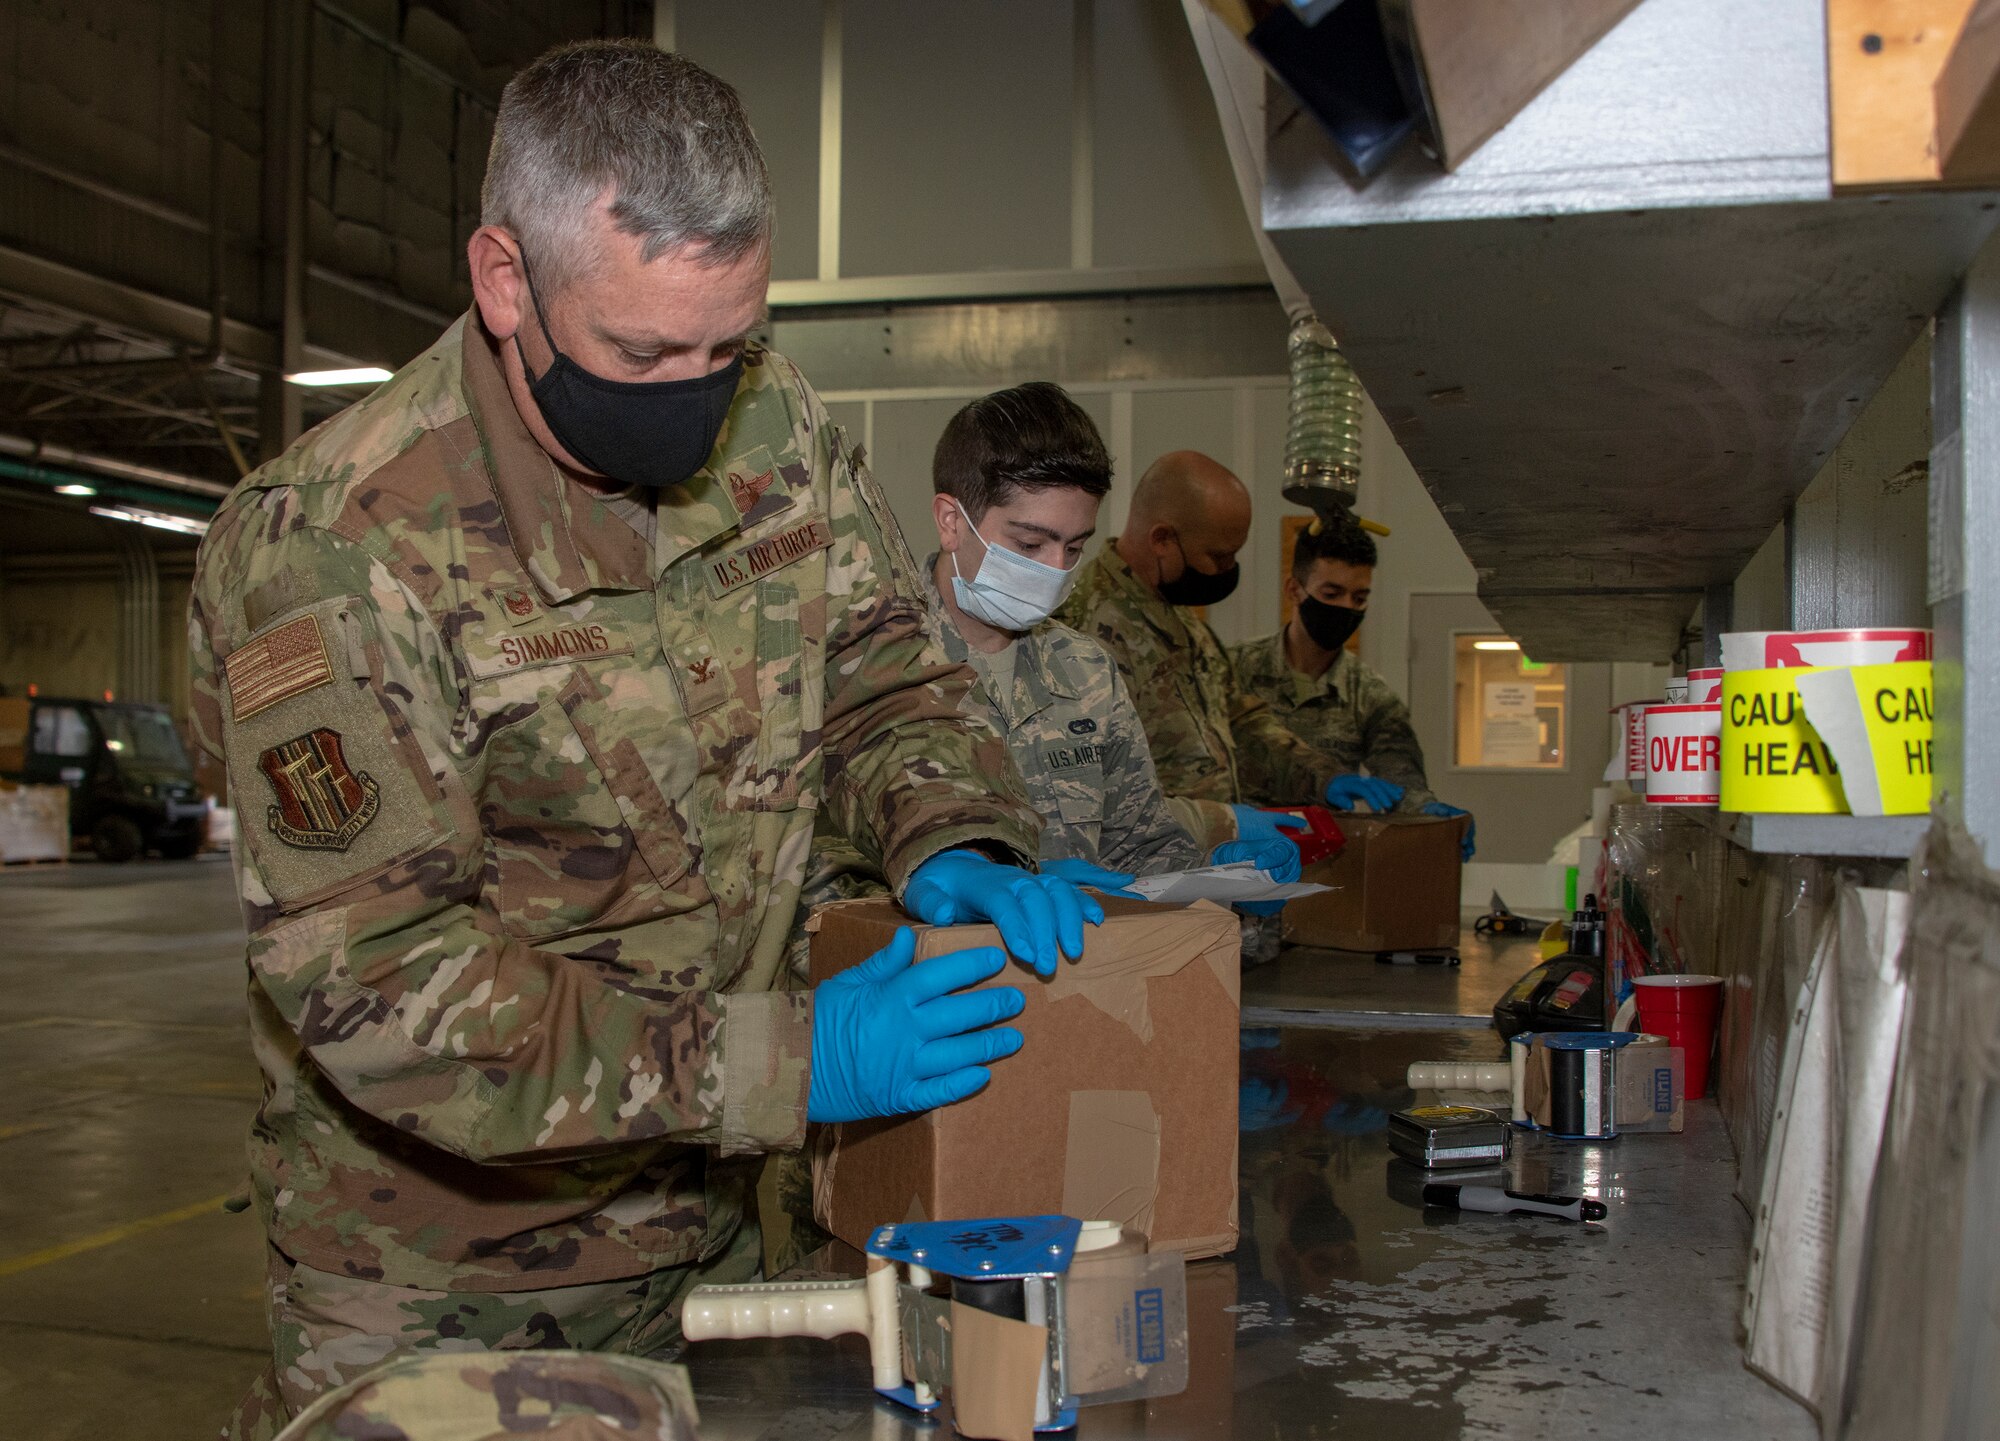 From left, U.S. Air Force Col. Corey Simmons, 60th Air Mobility Wing commander, Airman 1st Class Gregory Concilla, 60th Aerial Port Squadron packing and crating technician, Chief Master Sgt. Robert Schultz, 60th AMW command chief, and A1C Yaser Belal, 60th APS packing and crating technician, participate in a packing and crating demonstration during Leadership Rounds July 24, 2020, at Travis Air Force Base, California. The 60th APS is the United States Transportation Command's primary west coast aerial port providing global and passenger distribution for the United States and its Allies. The Leadership Rounds program provides 60th AMW leadership an opportunity to interact with Airmen and get a detailed view of each mission performed at Travis AFB. (U.S. Air Force photo by Heide Couch)